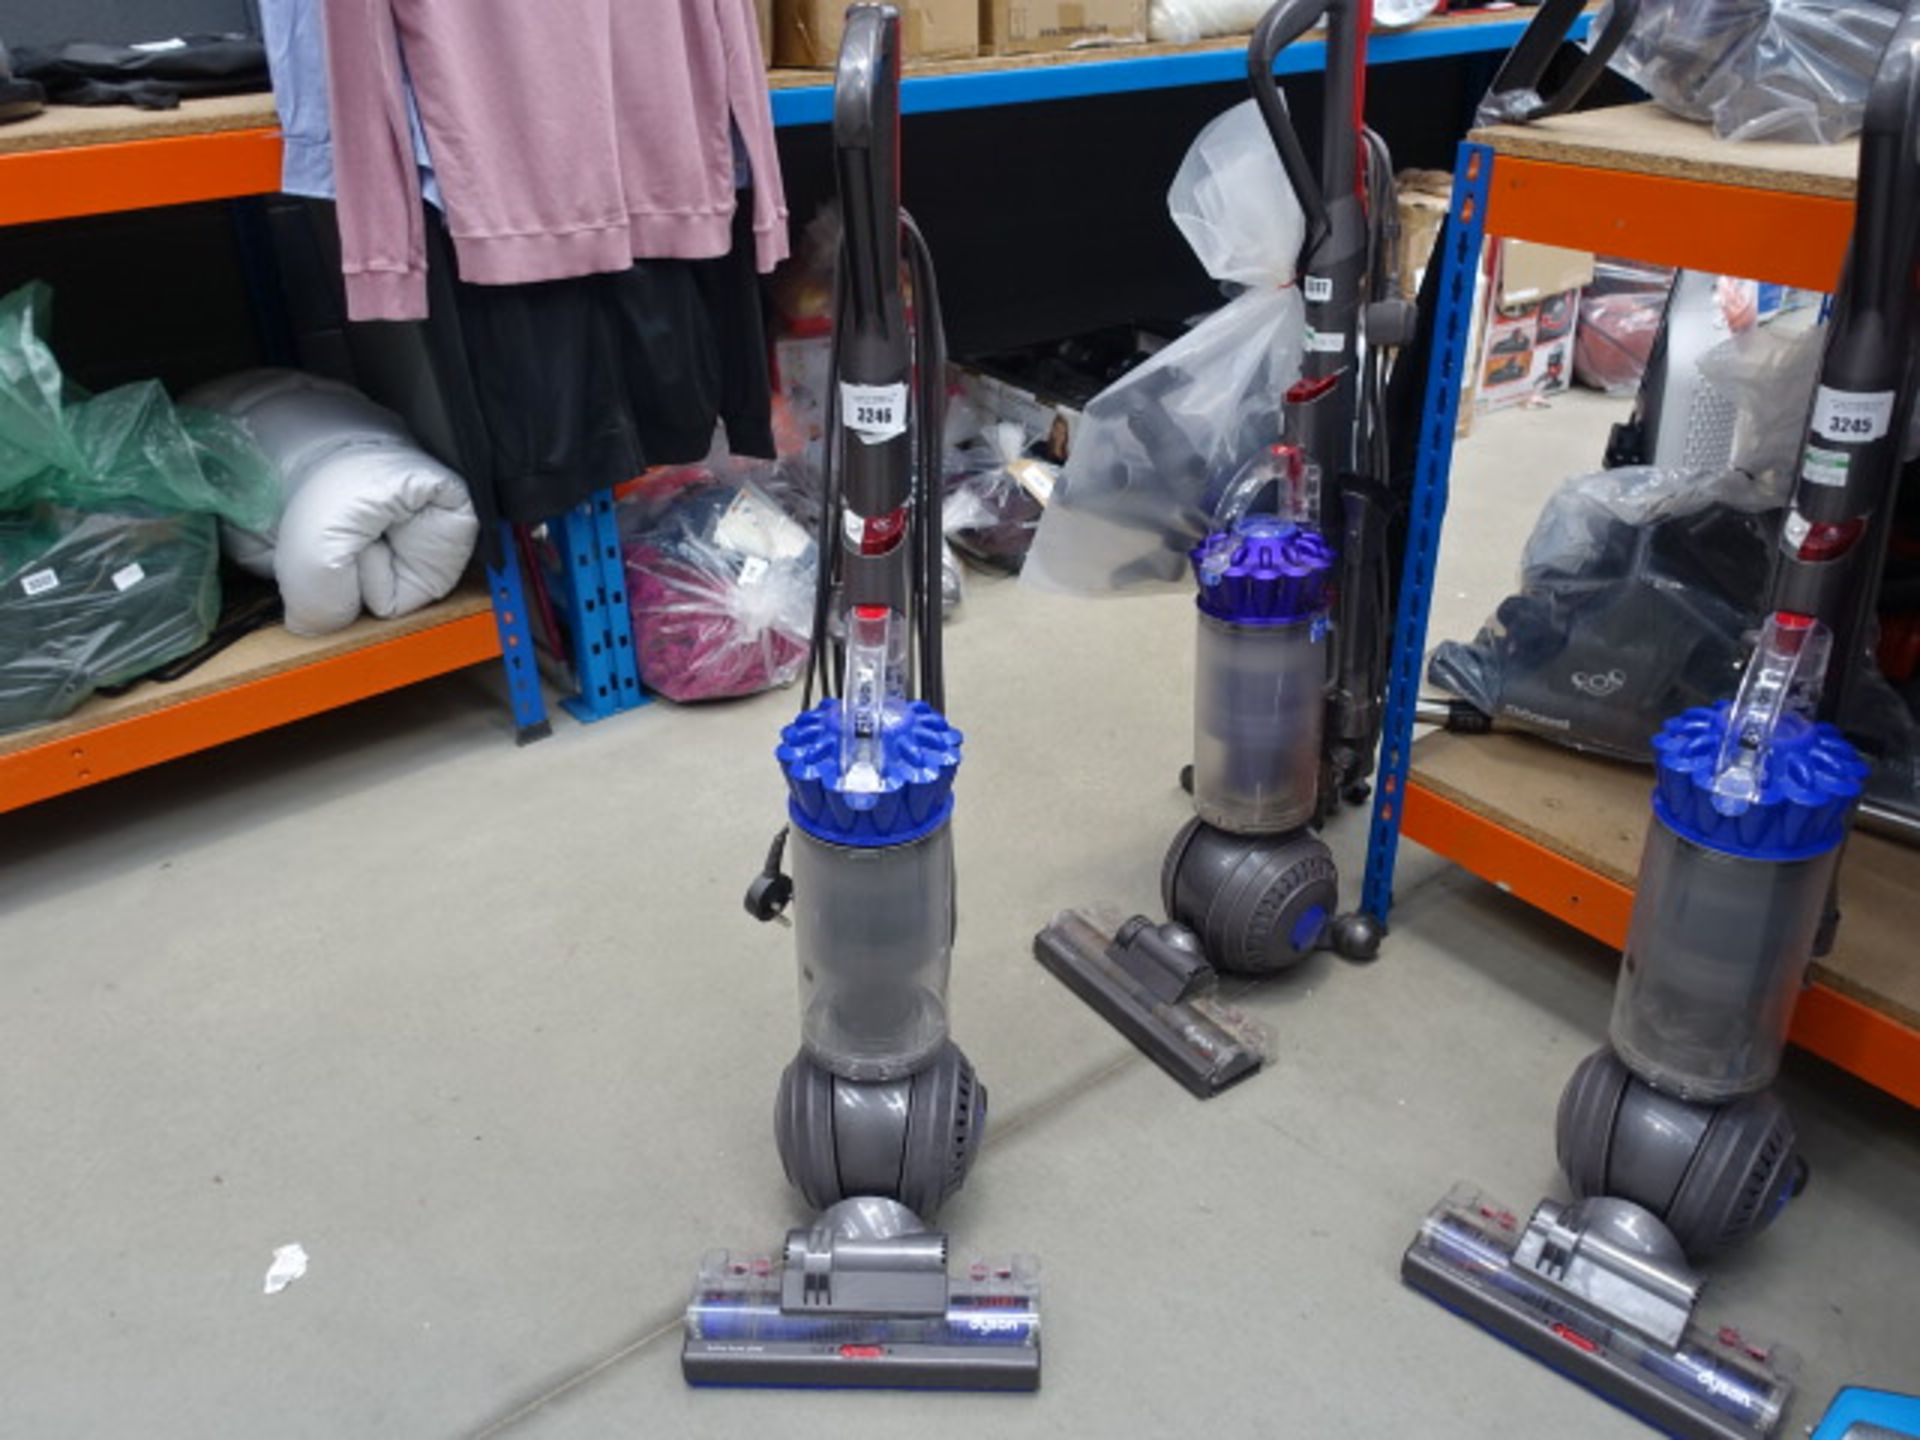 Upright Dyson DC40 vacuum cleaner